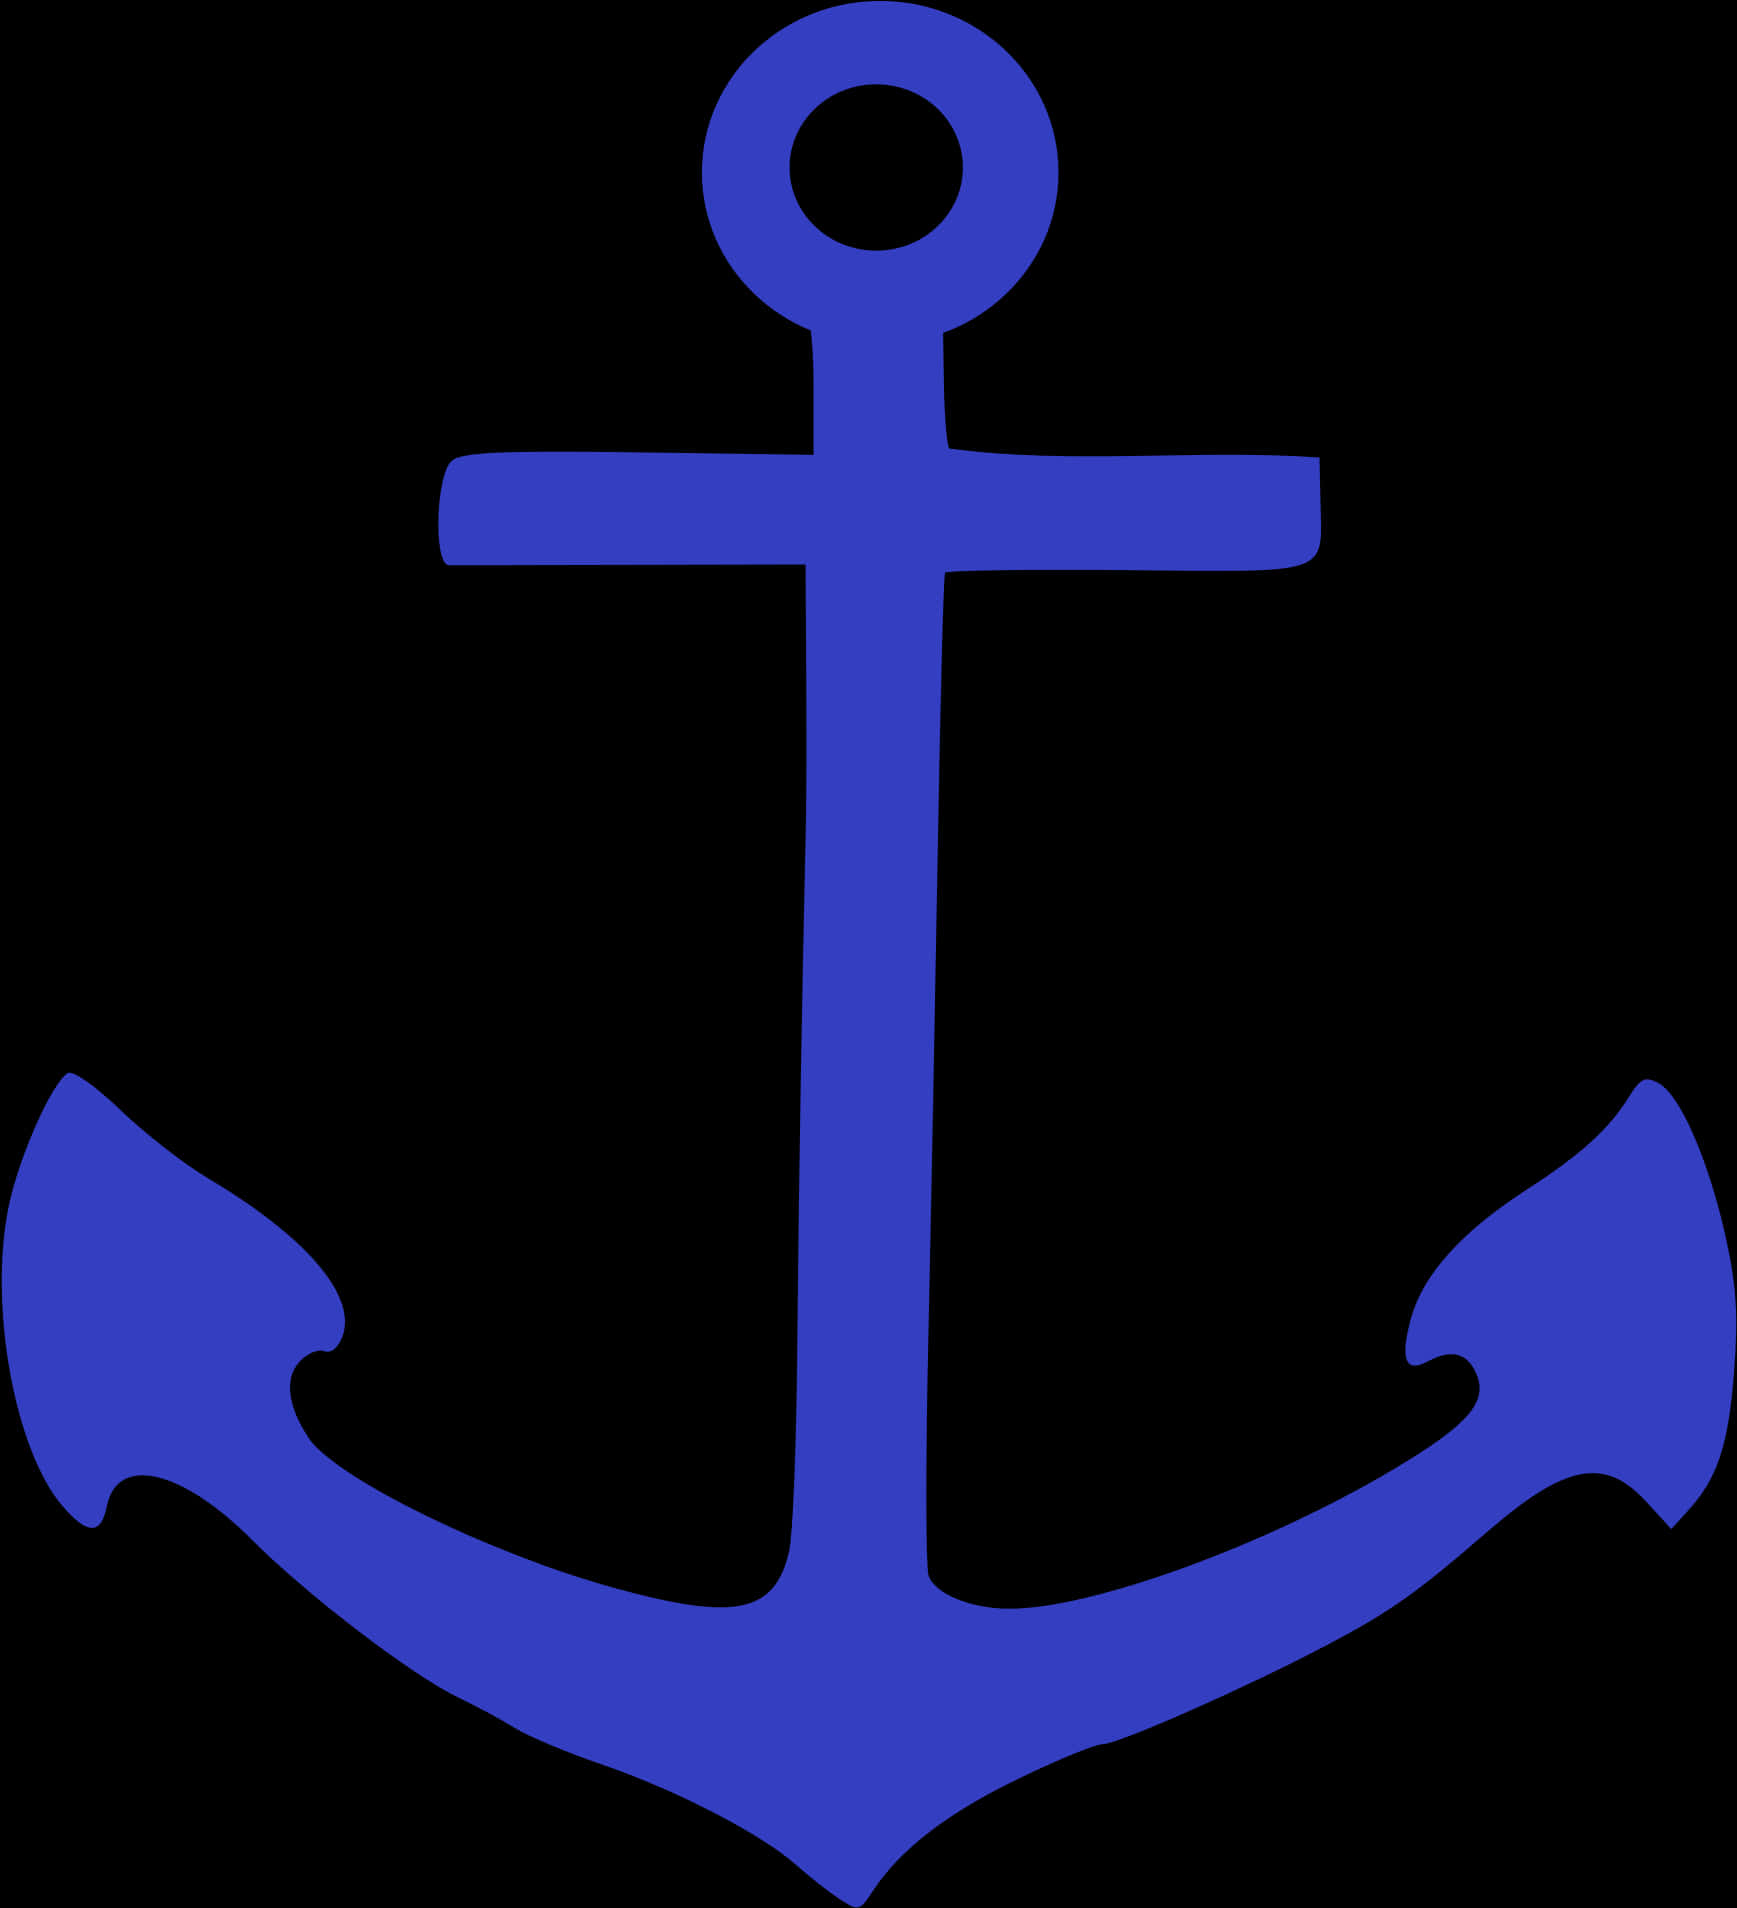 A Blue Anchor On A Black Background